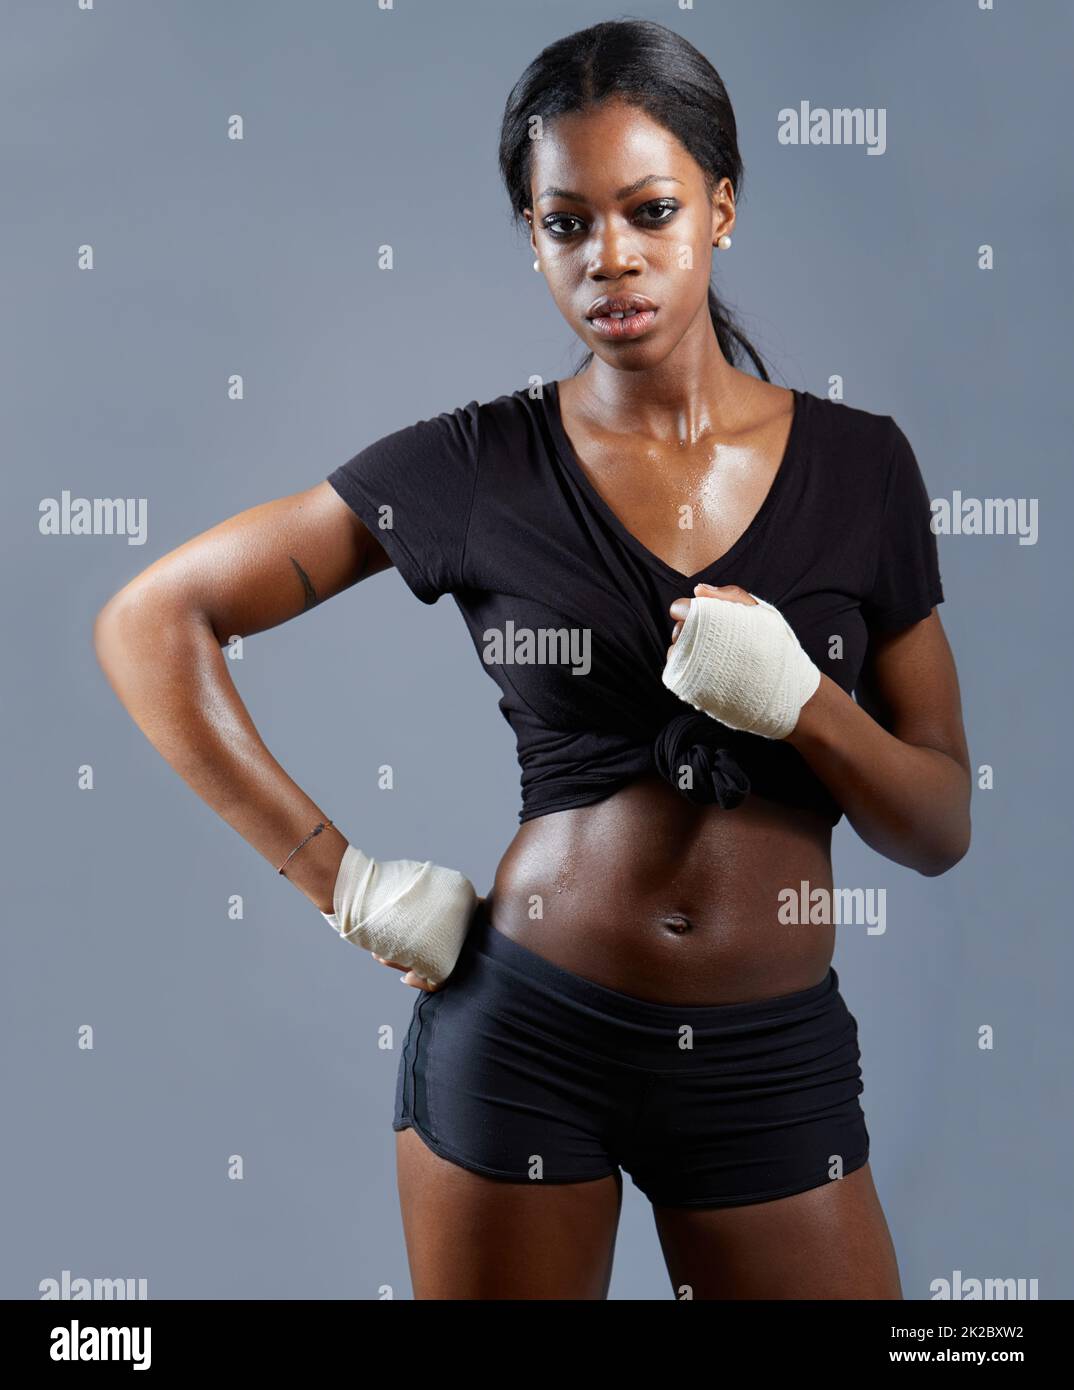 https://c8.alamy.com/comp/2K2BXW2/intimidating-stance-an-african-american-boxer-posing-in-studio-with-a-hand-on-her-hips-2K2BXW2.jpg